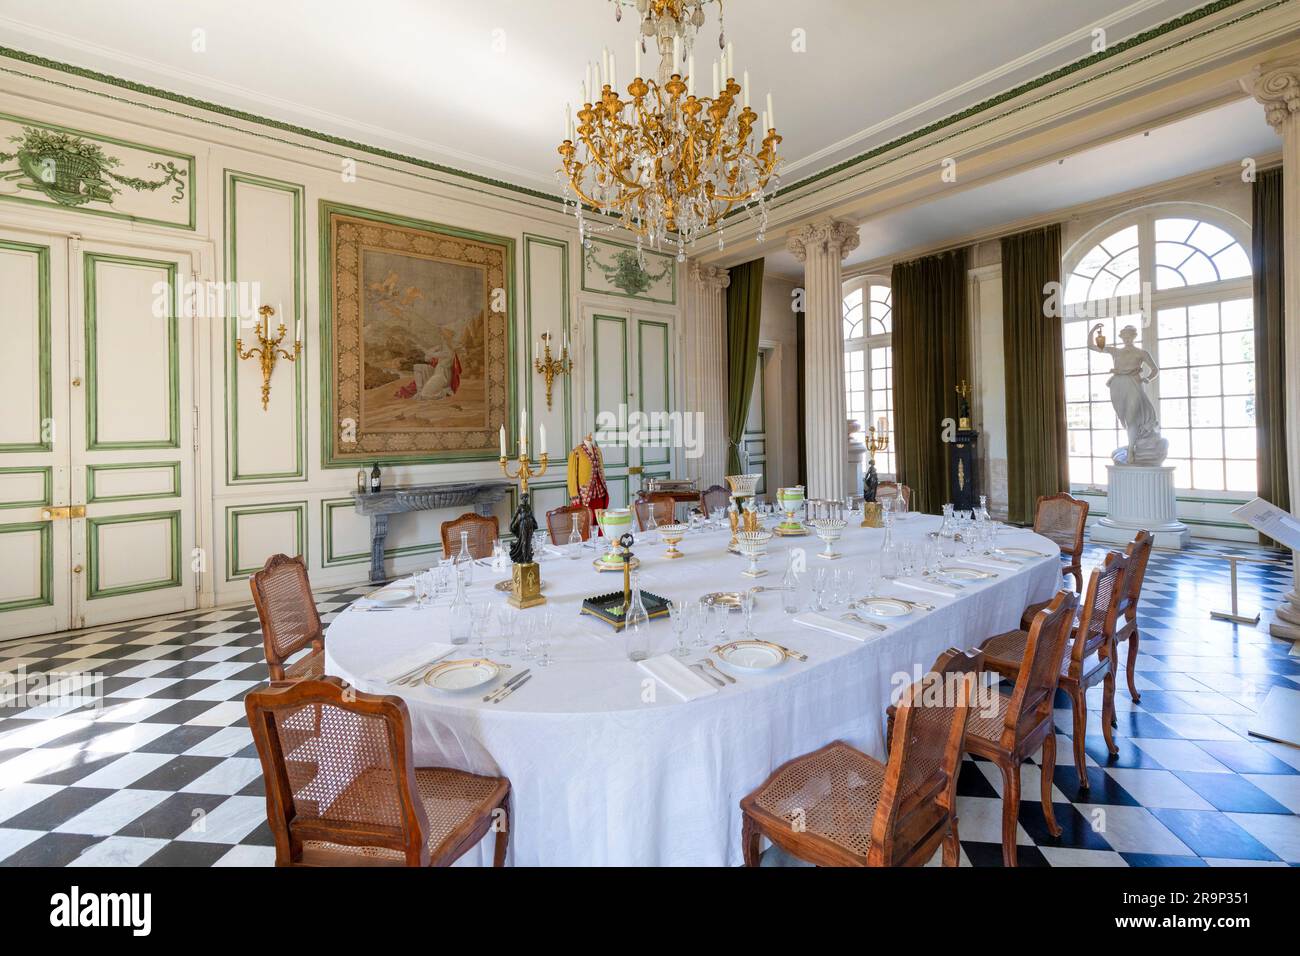 The Dining Room, Chateau De Valencay, Valencay, Loire Valley, France, Western Europe Stock Photo